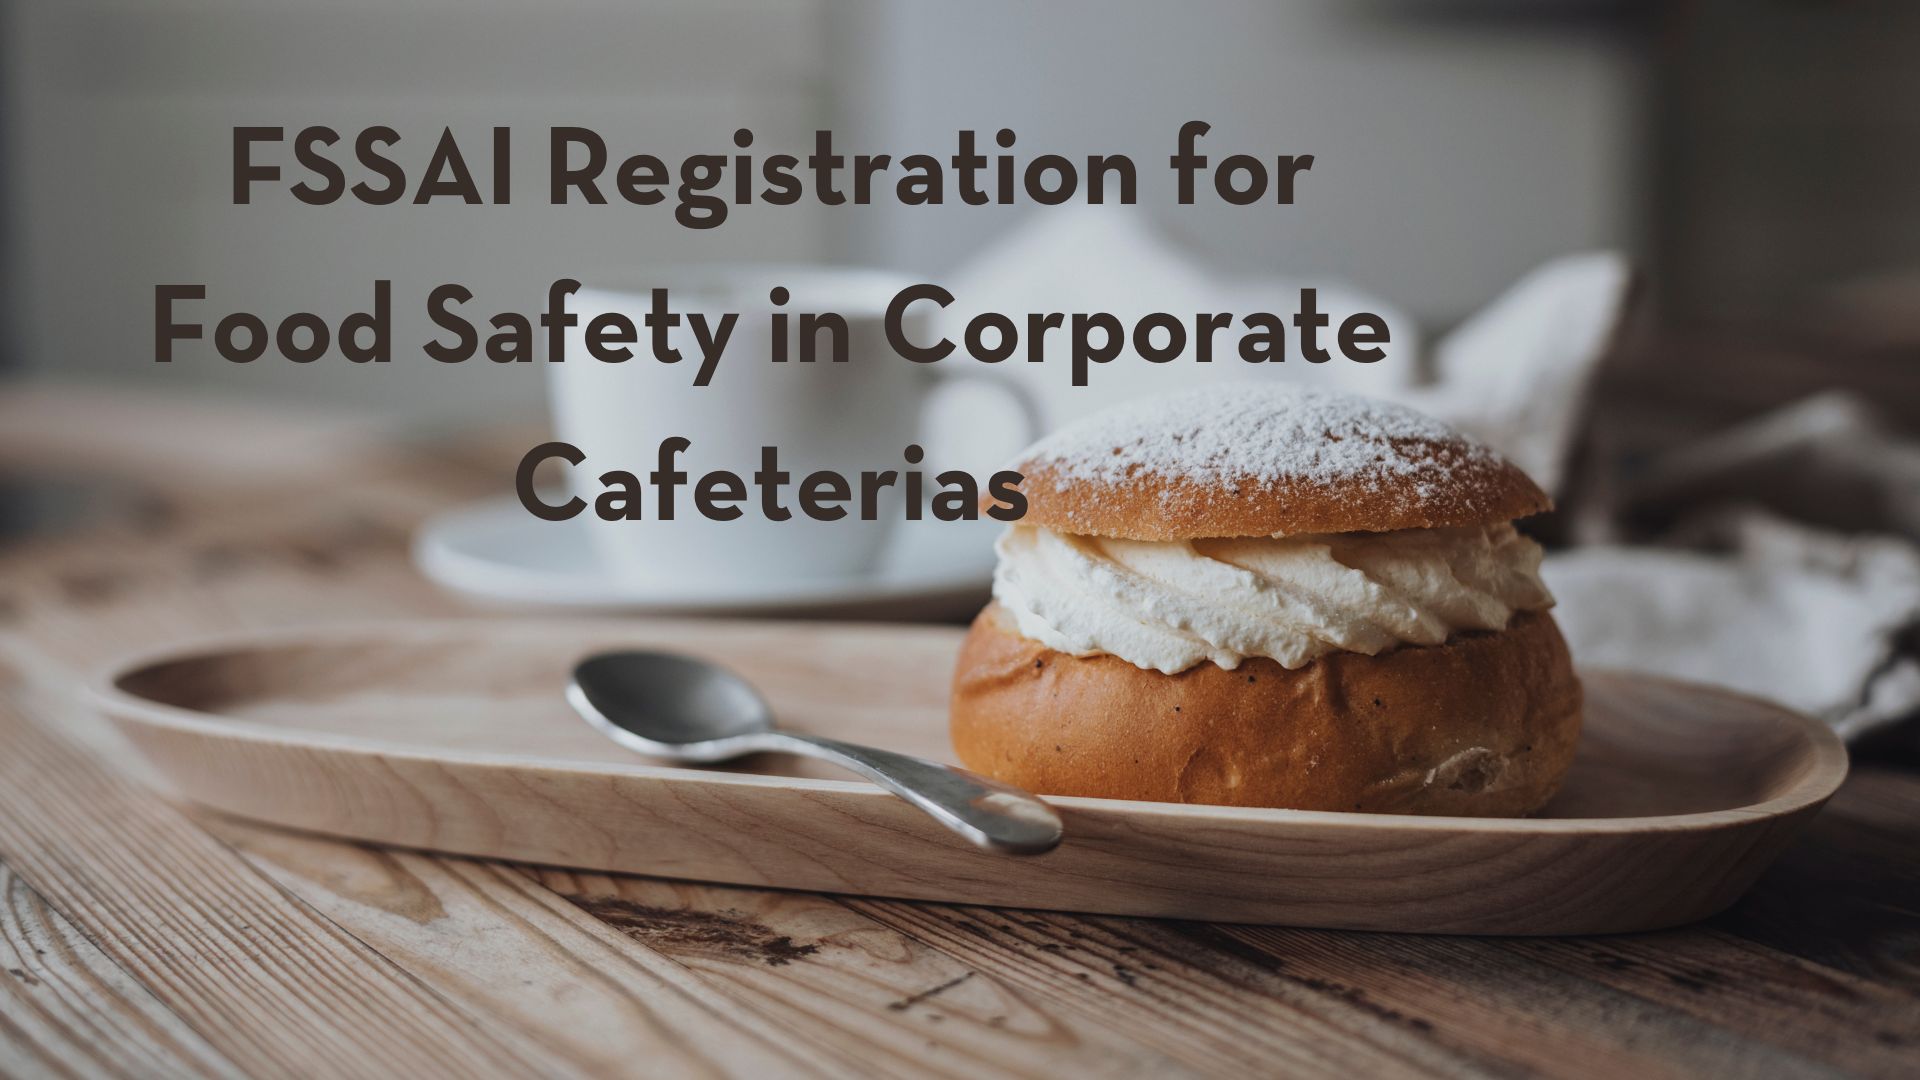 FSSAI Registration for Food Safety in Corporate Cafeterias